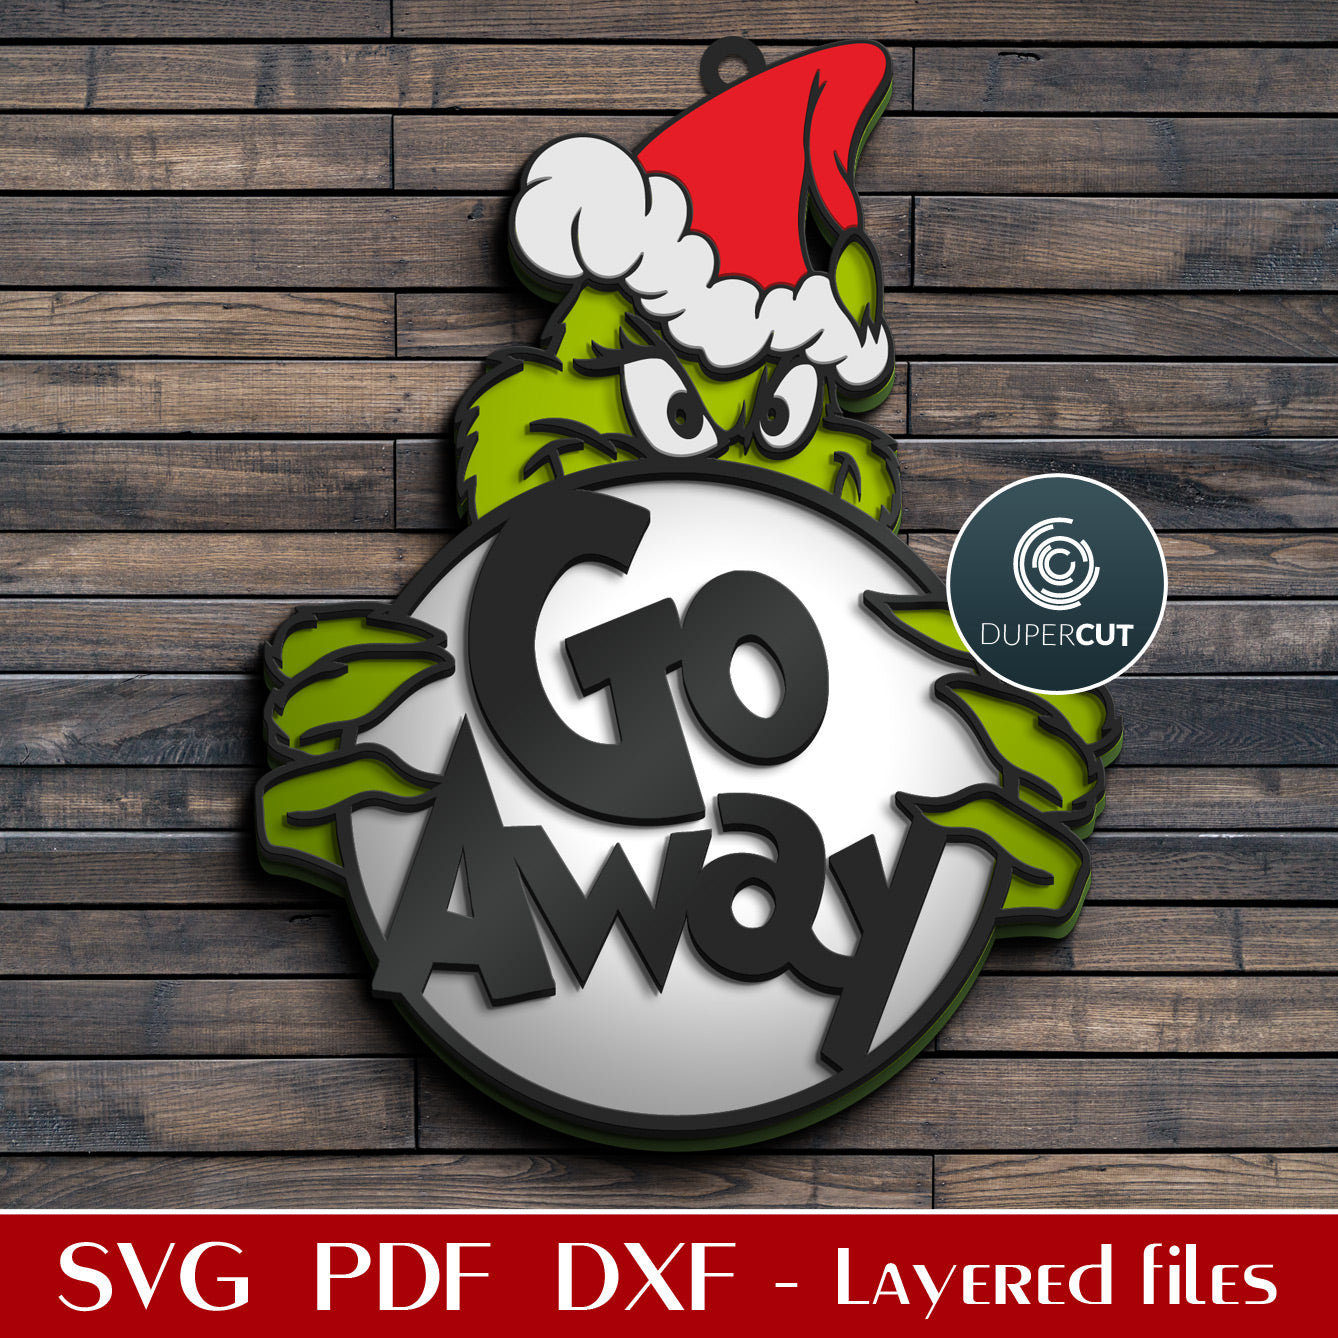 Grinch funny ornament - go away template - SVG DXF laser cutting vector files for Glowforge, Cricut, Silhouette cameo, CNC plasma machines by DuperCut